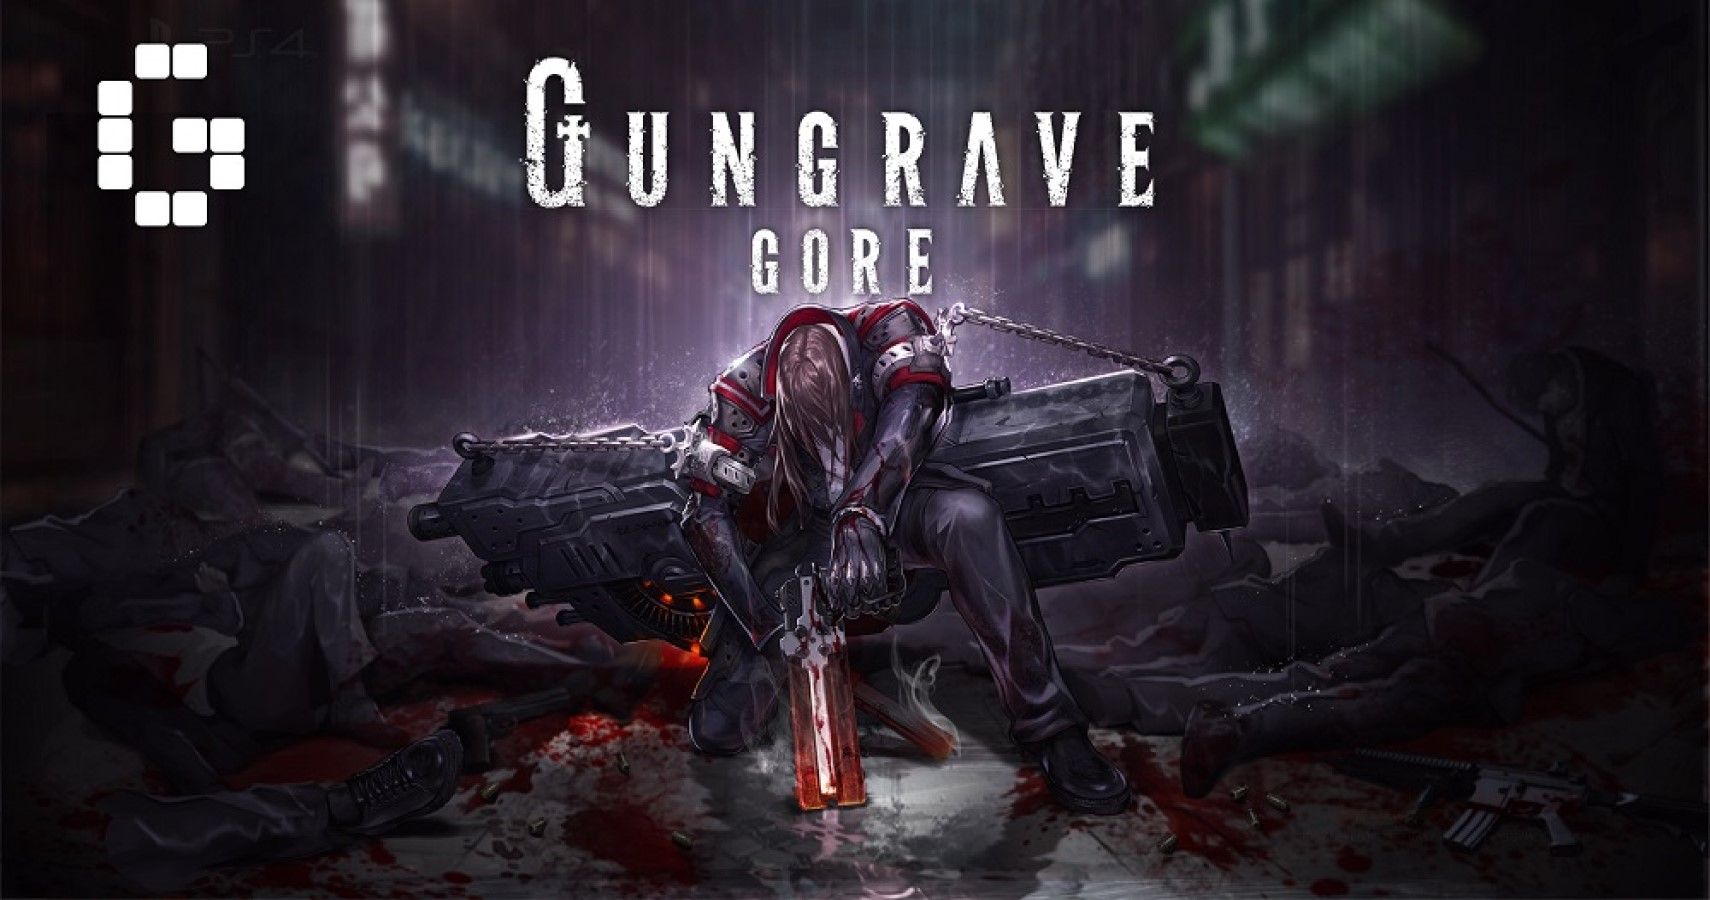 That New Gungrave Game Is Still Happening Apparently